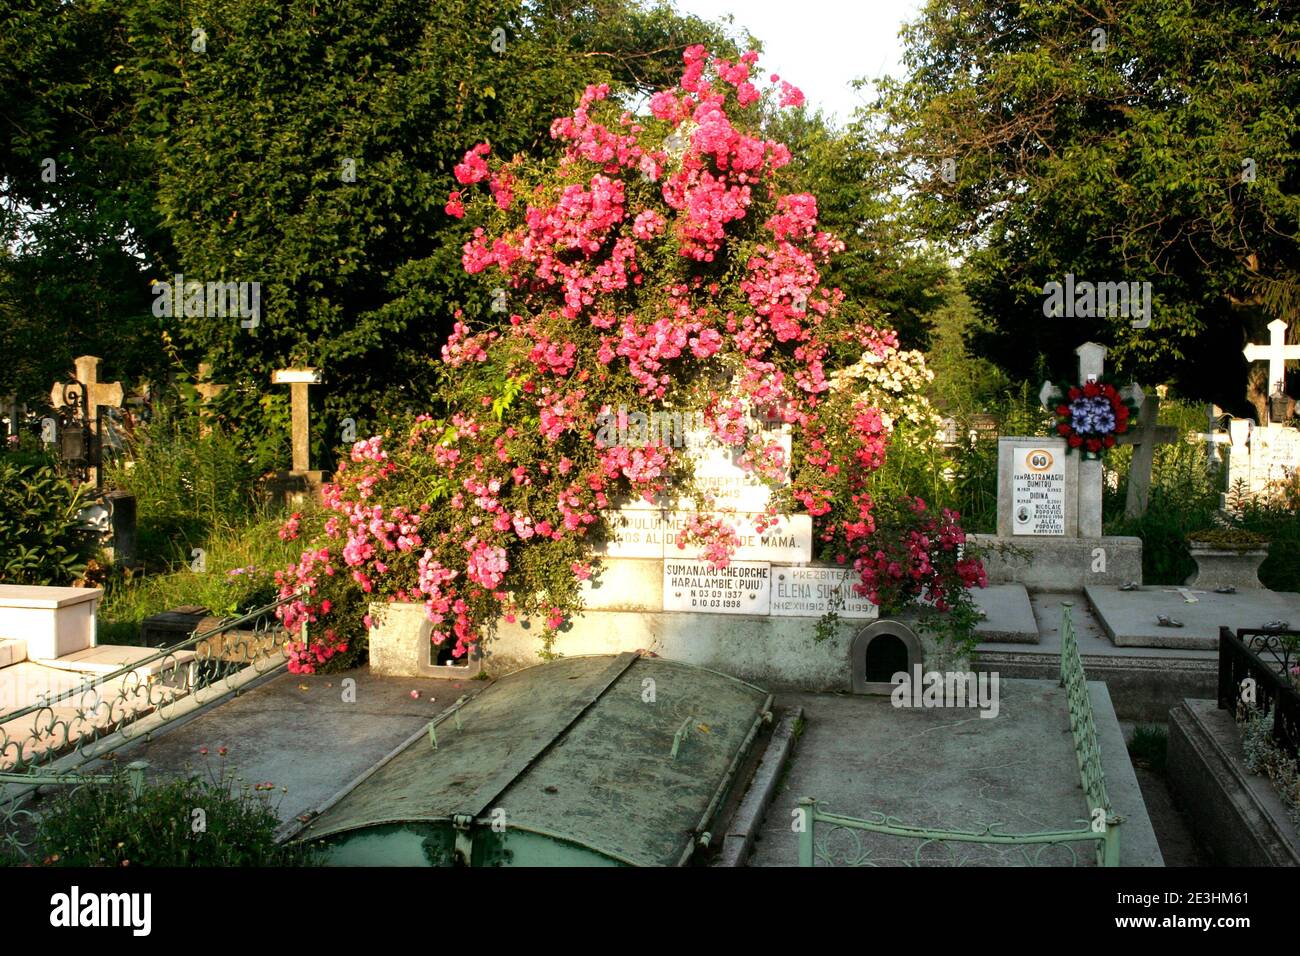 Tomb in a Christian Orthodox cemetery in Romania, with cross covered in a climbing rose plant Stock Photo